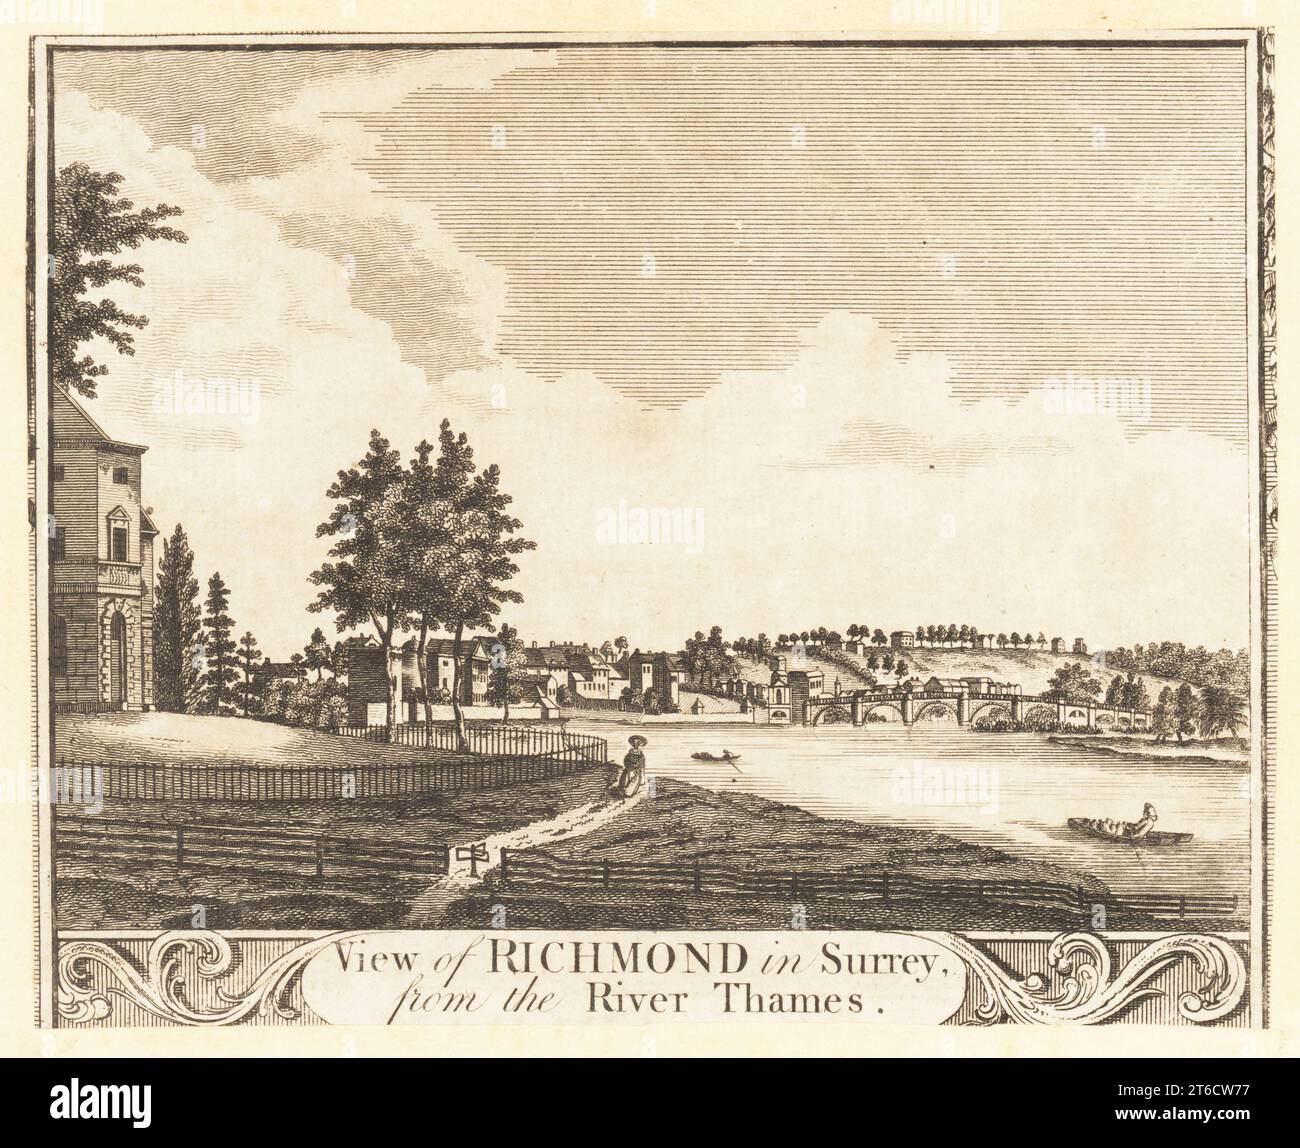 View of Richmond in Surrey from the River Thames, 18th century. Richmond Place (now Asgill House), a Palladian villa built by Sir Robert Taylor in 1757, in the foreground. The stone arch bridge Richmond Bridge was built in 1774-77 by architects James Paine and Kenton Couse. Copperplate engraving from William Thorntons New, Complete and Universal History of the City of London, Alexander Hogg, King's Arms, No. 16 Paternoster Row, London, 1784. Stock Photo